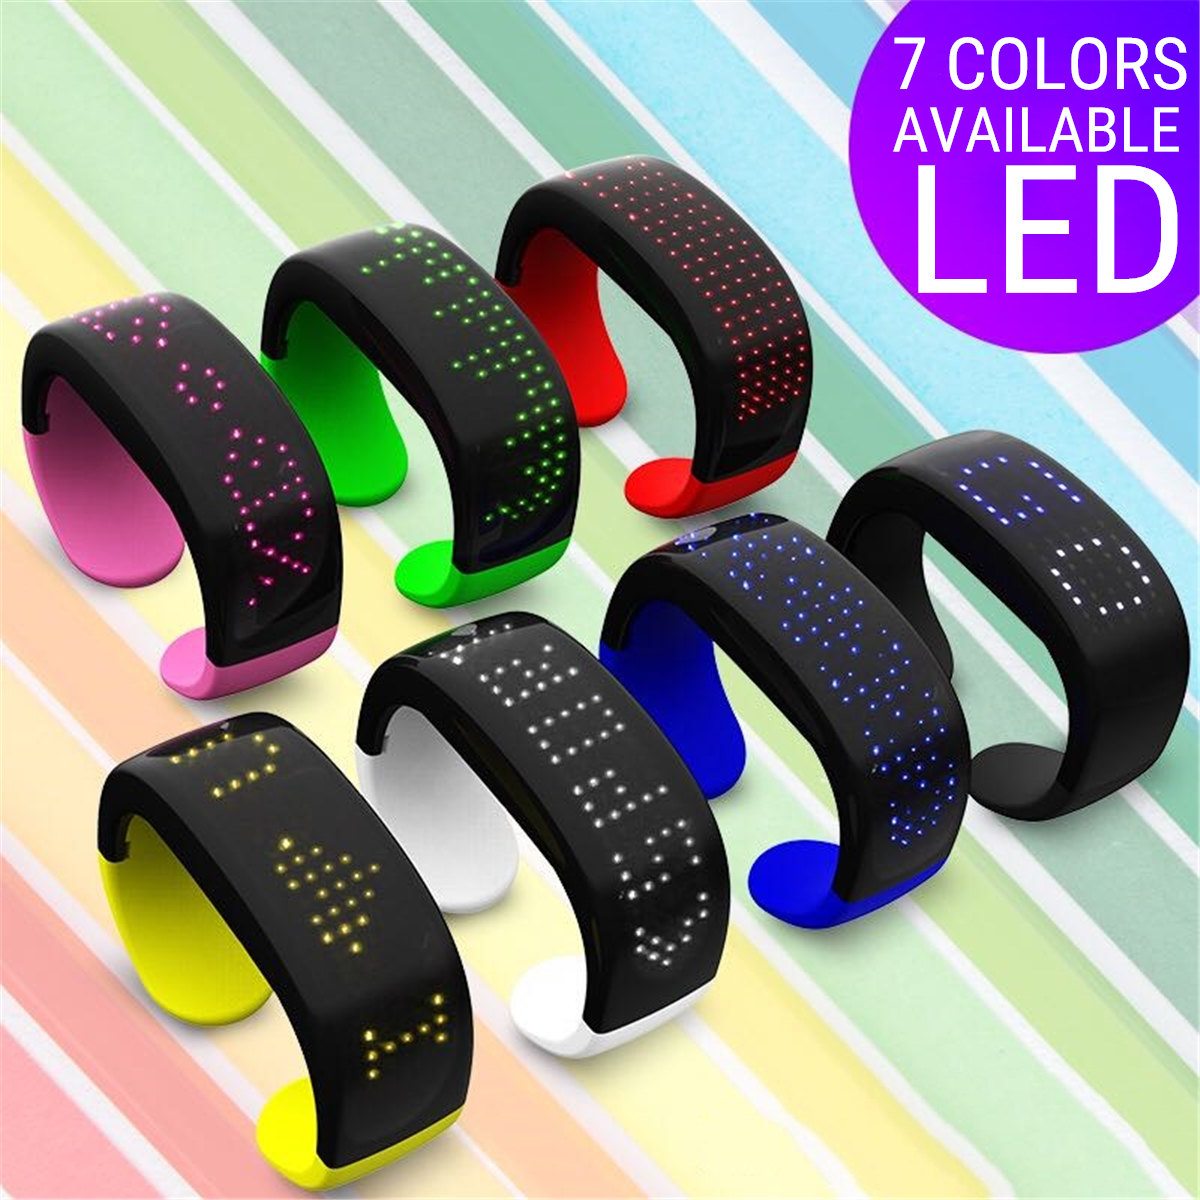 Cheering-Colorful-Display-Dynamic-LED-Luminous-Bracelet-Night-Running-Concert-Party-Props-Bracelet-1652102-1